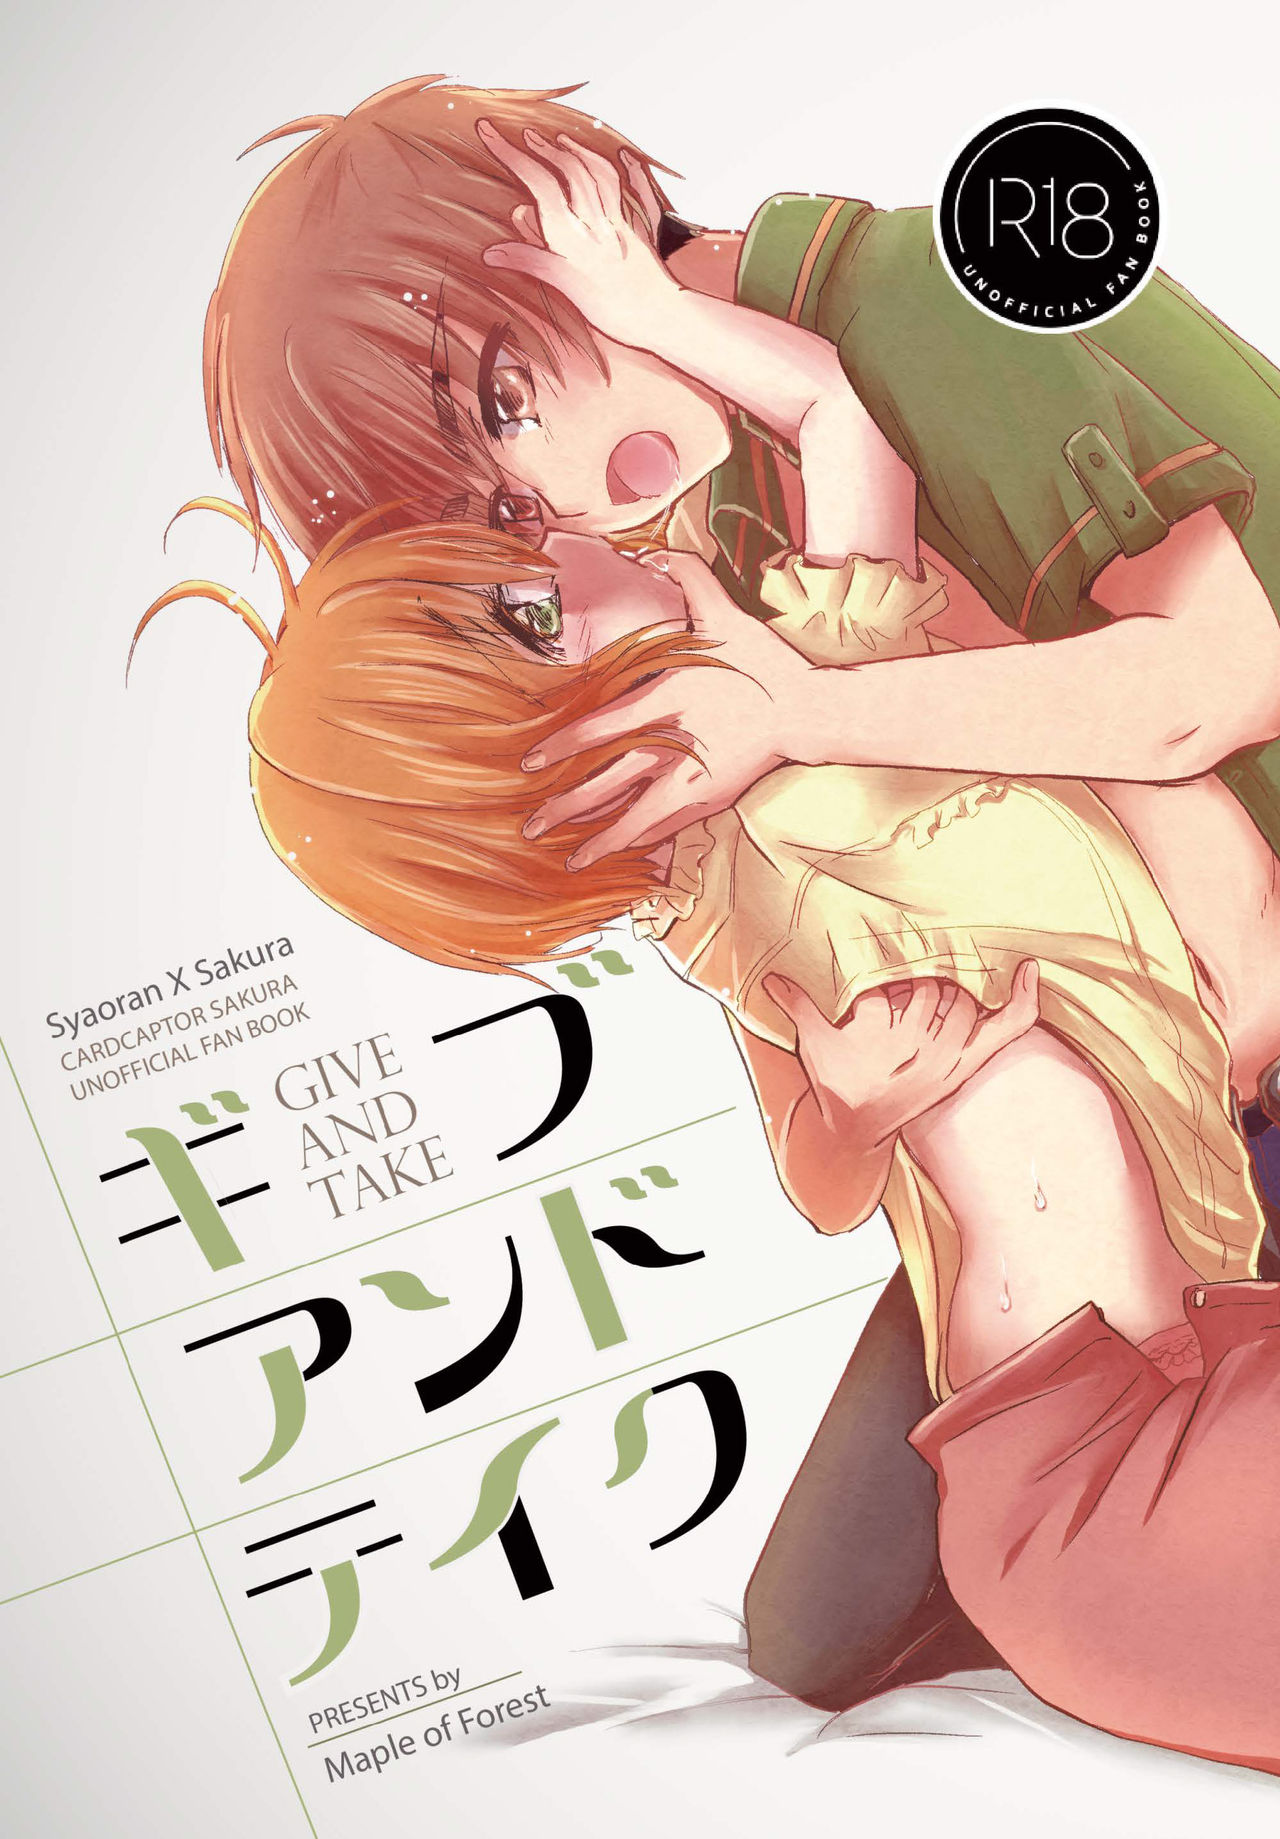 [Maple of Forest (Kaede Sago)] Give and Take (Cardcaptor Sakura) [Chinese] [新桥月白日语社] [Digital] page 2 full